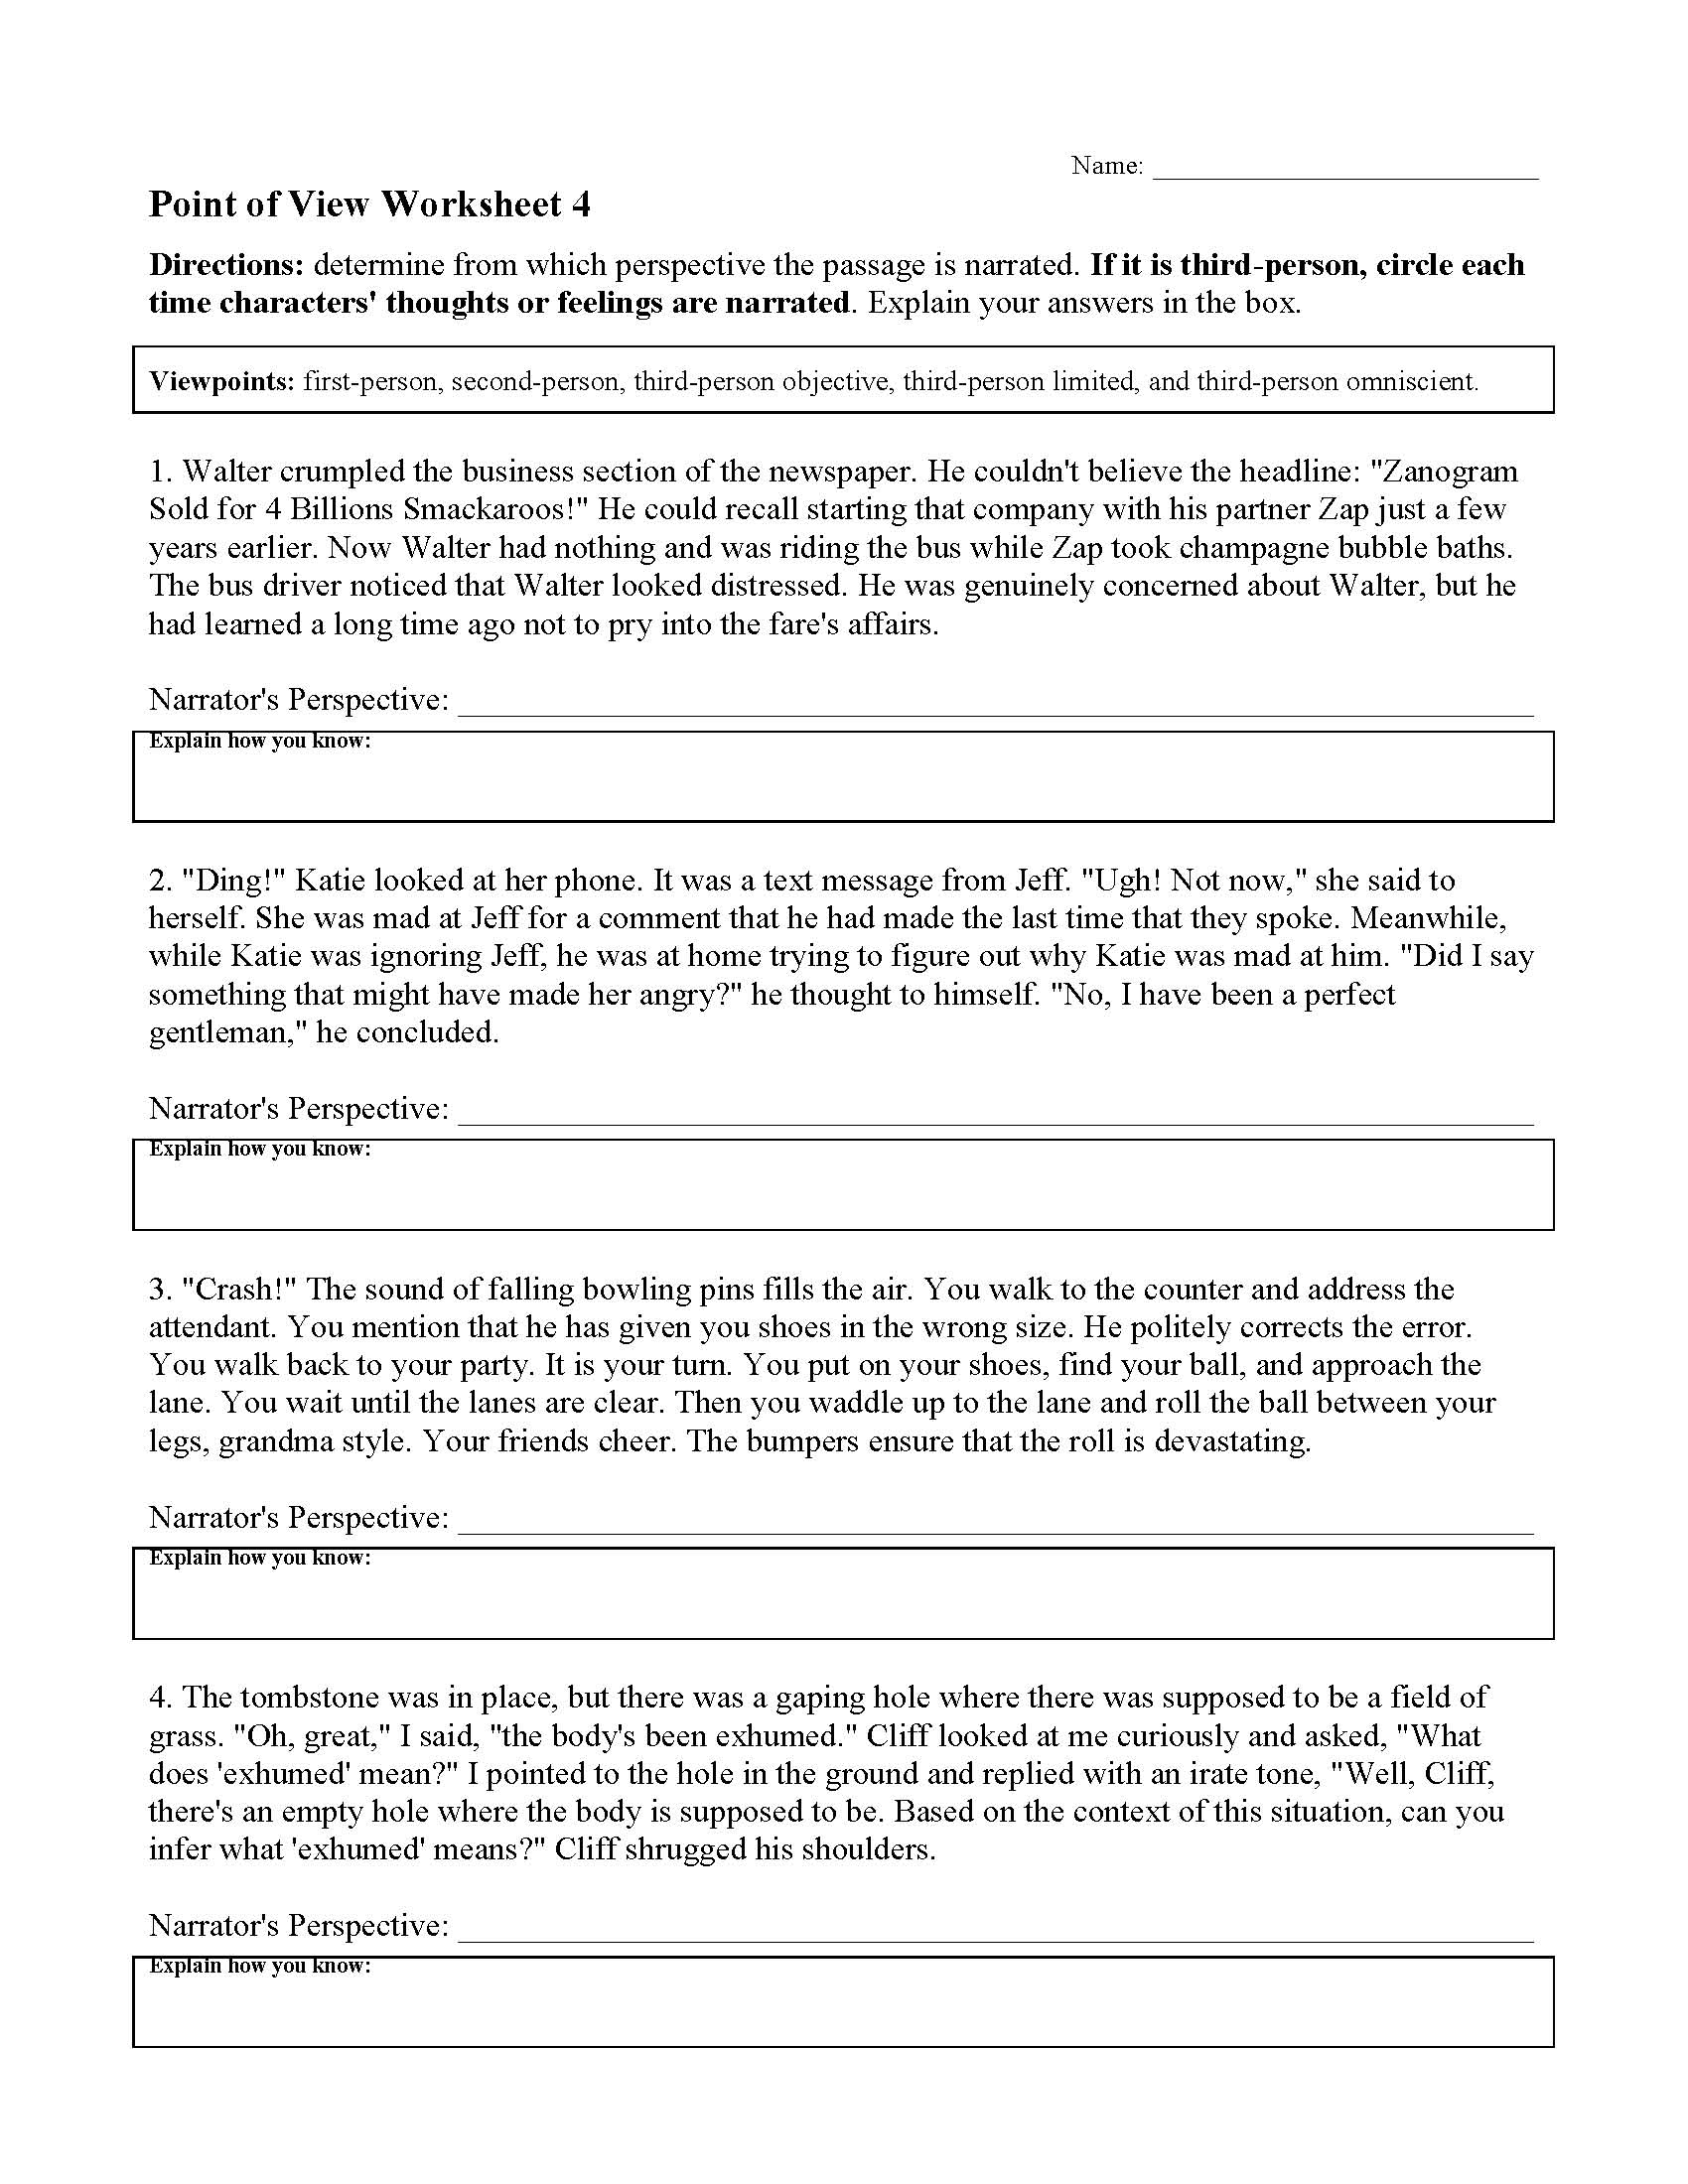 Point of View Worksheet 20  Preview For Point Of View Worksheet